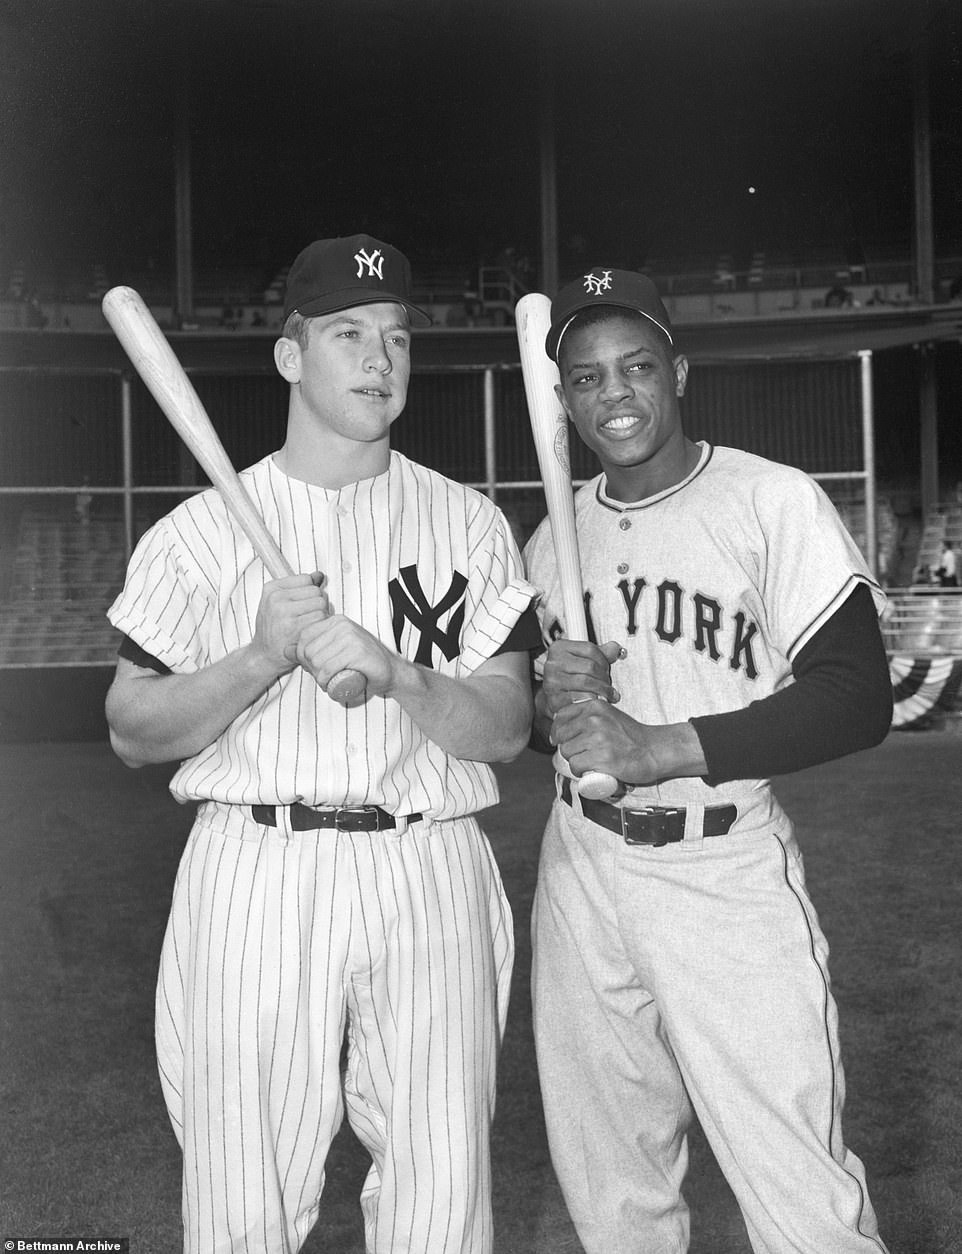 Mickey Mantle (L), poses with Willie Mays (R) at Yankee Stadium prior to the World Series in 1951